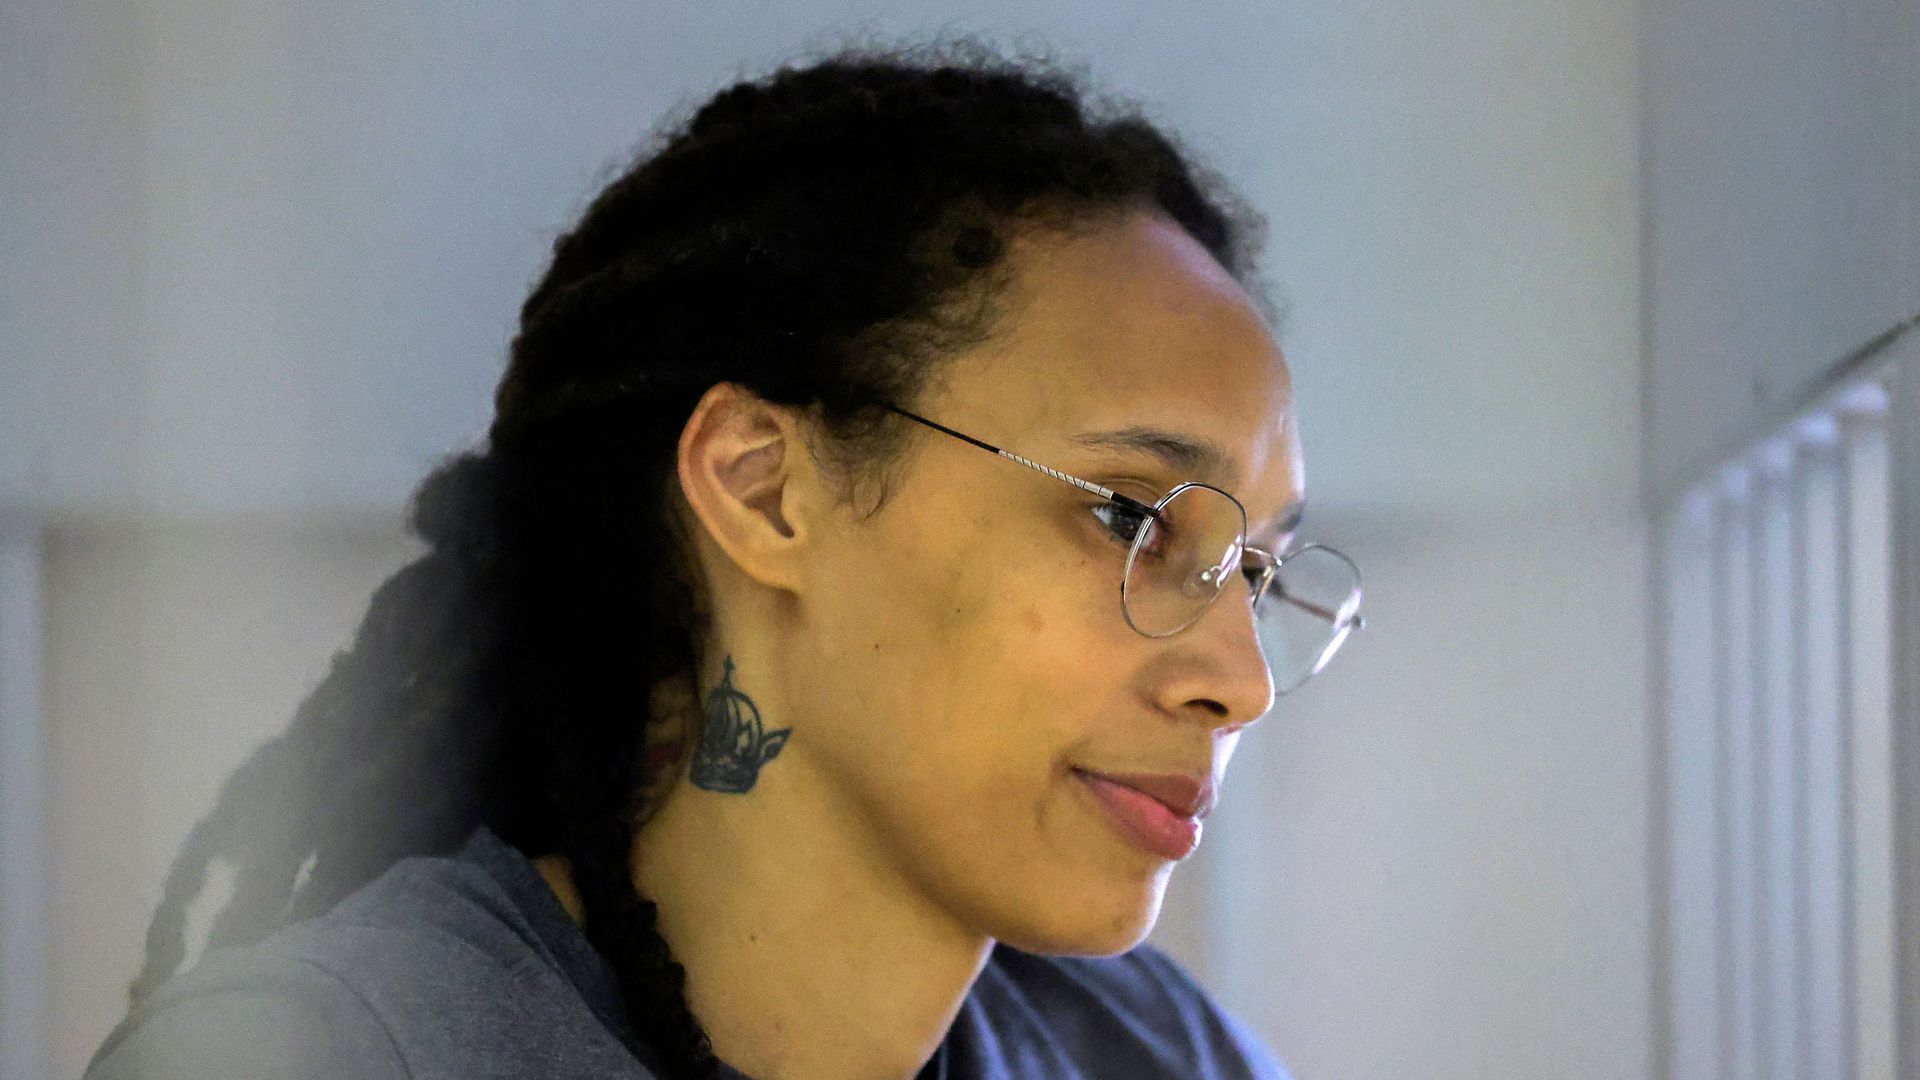 Brittney Griner during a hearing in Khimki, Russia, outside Moscow on Aug. 4. Photo: Evgenia Novozhenina/Pool/AFP via Getty Images